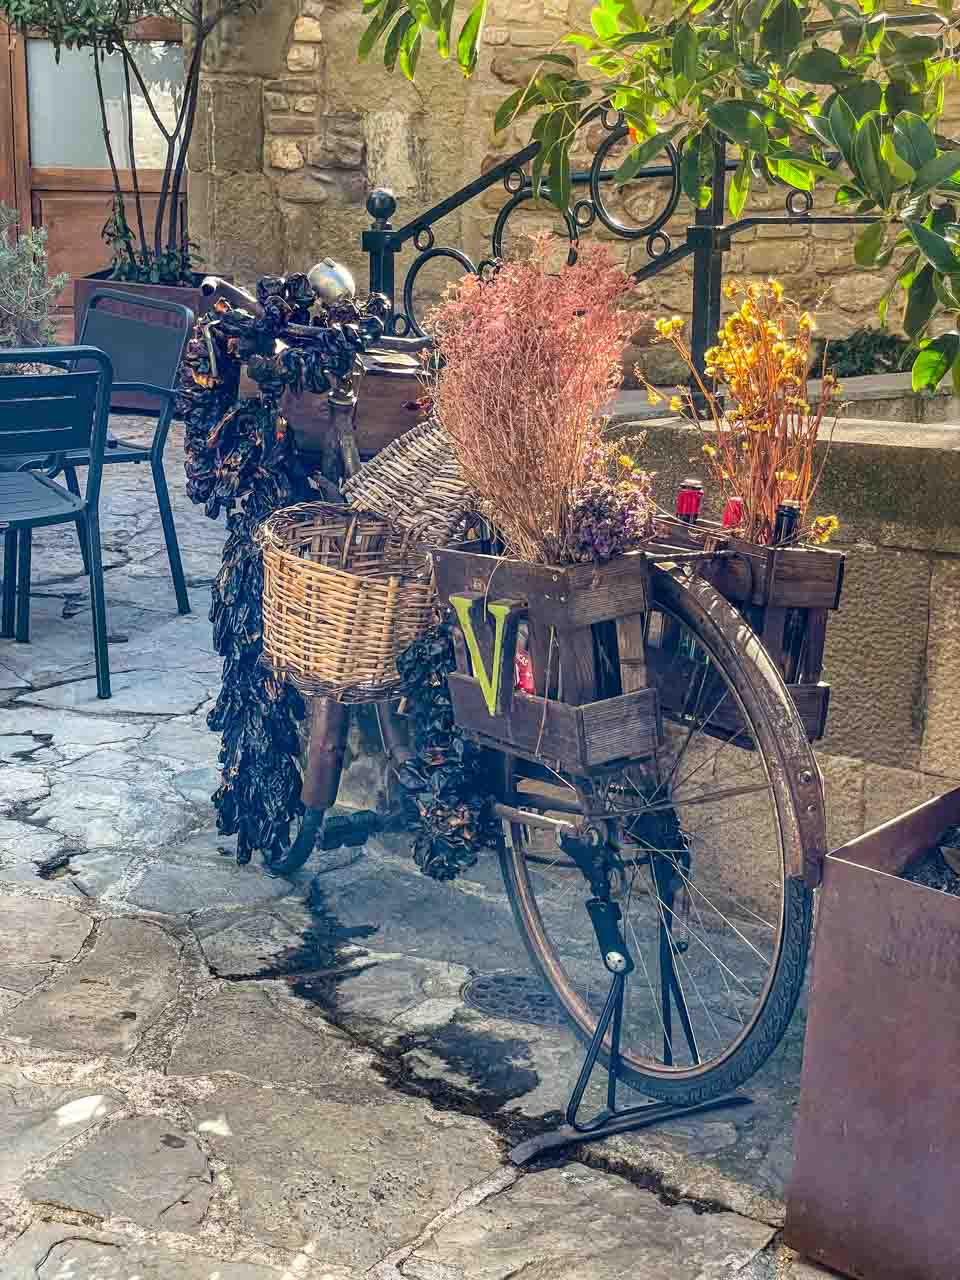 A bicycle adorned with wooden and wicker baskets sits an old town courtyard.